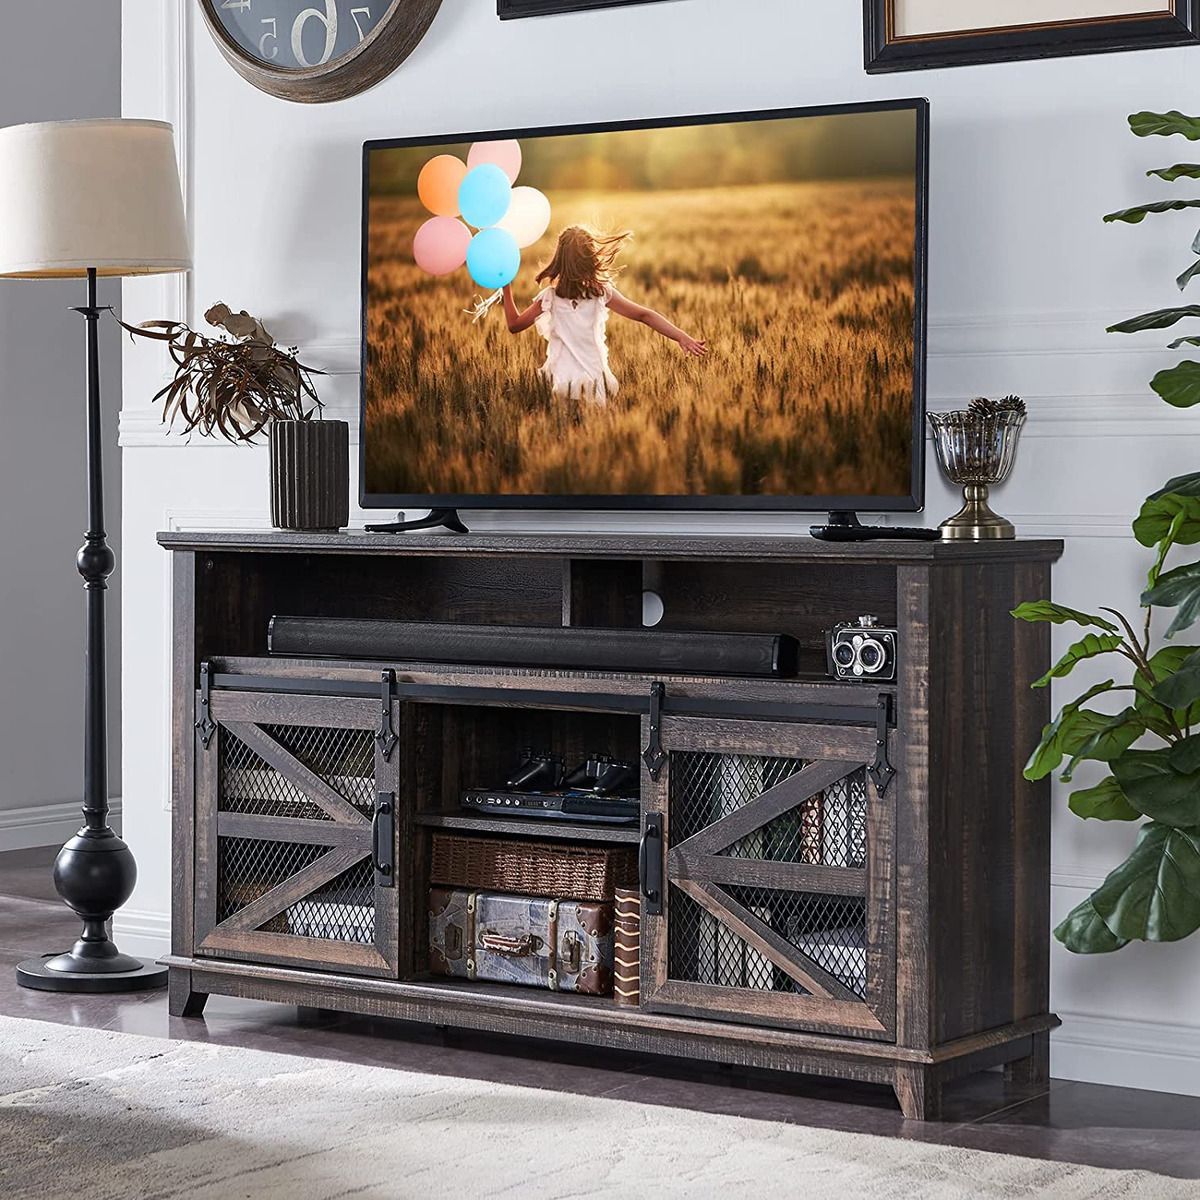 Farmhouse Tv Stand For 65+ Inch Tv, Industrial & Farmhouse Media  Entertainment C | Ebay Pertaining To Farmhouse Media Entertainment Centers (Gallery 2 of 20)